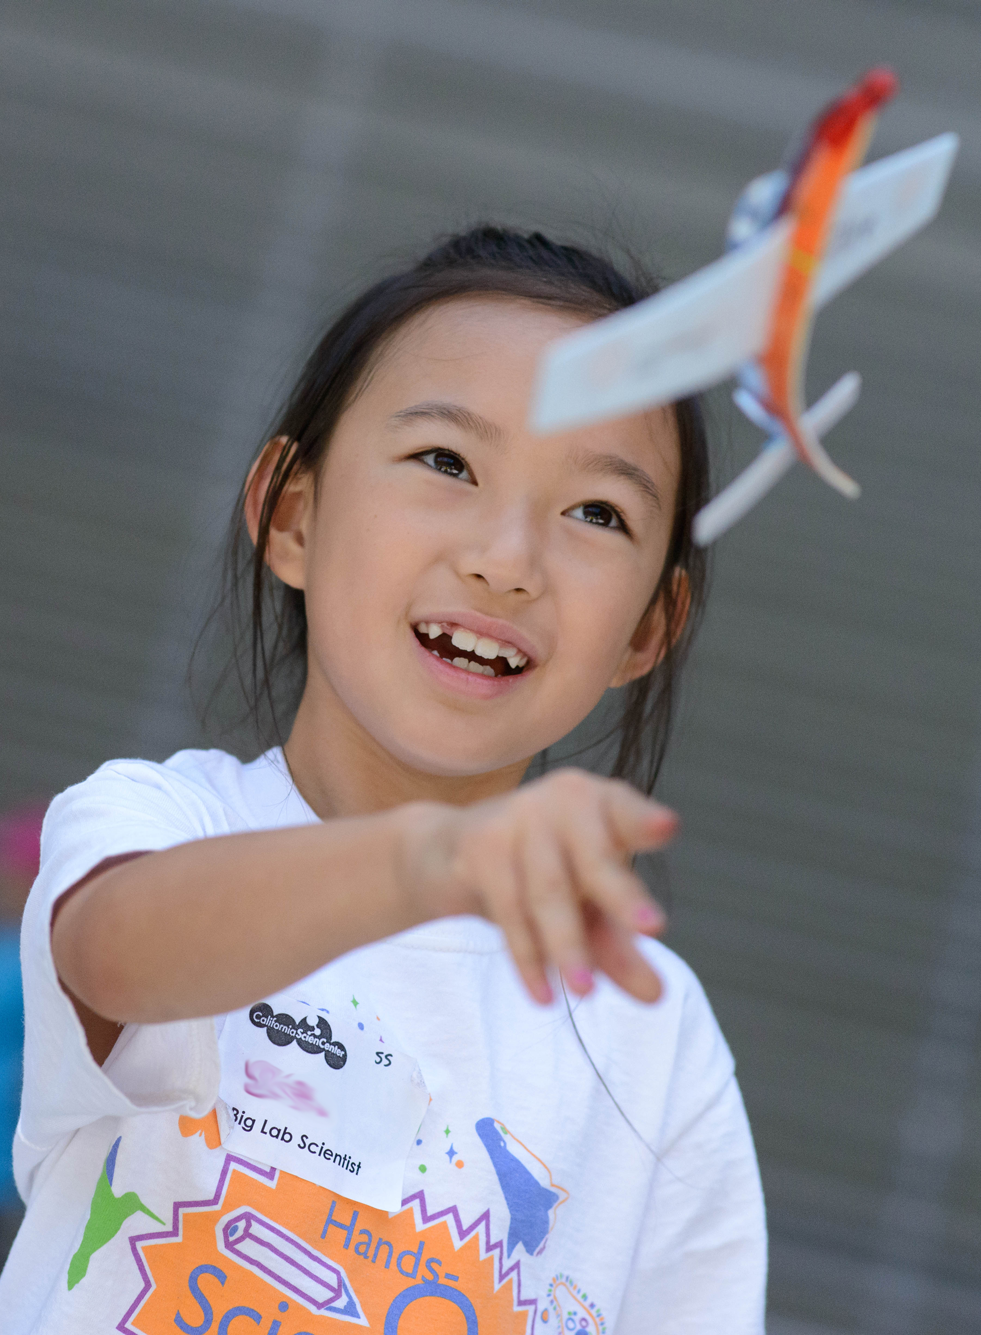 Girl throwing plane, while attending Hands-On Science Camp